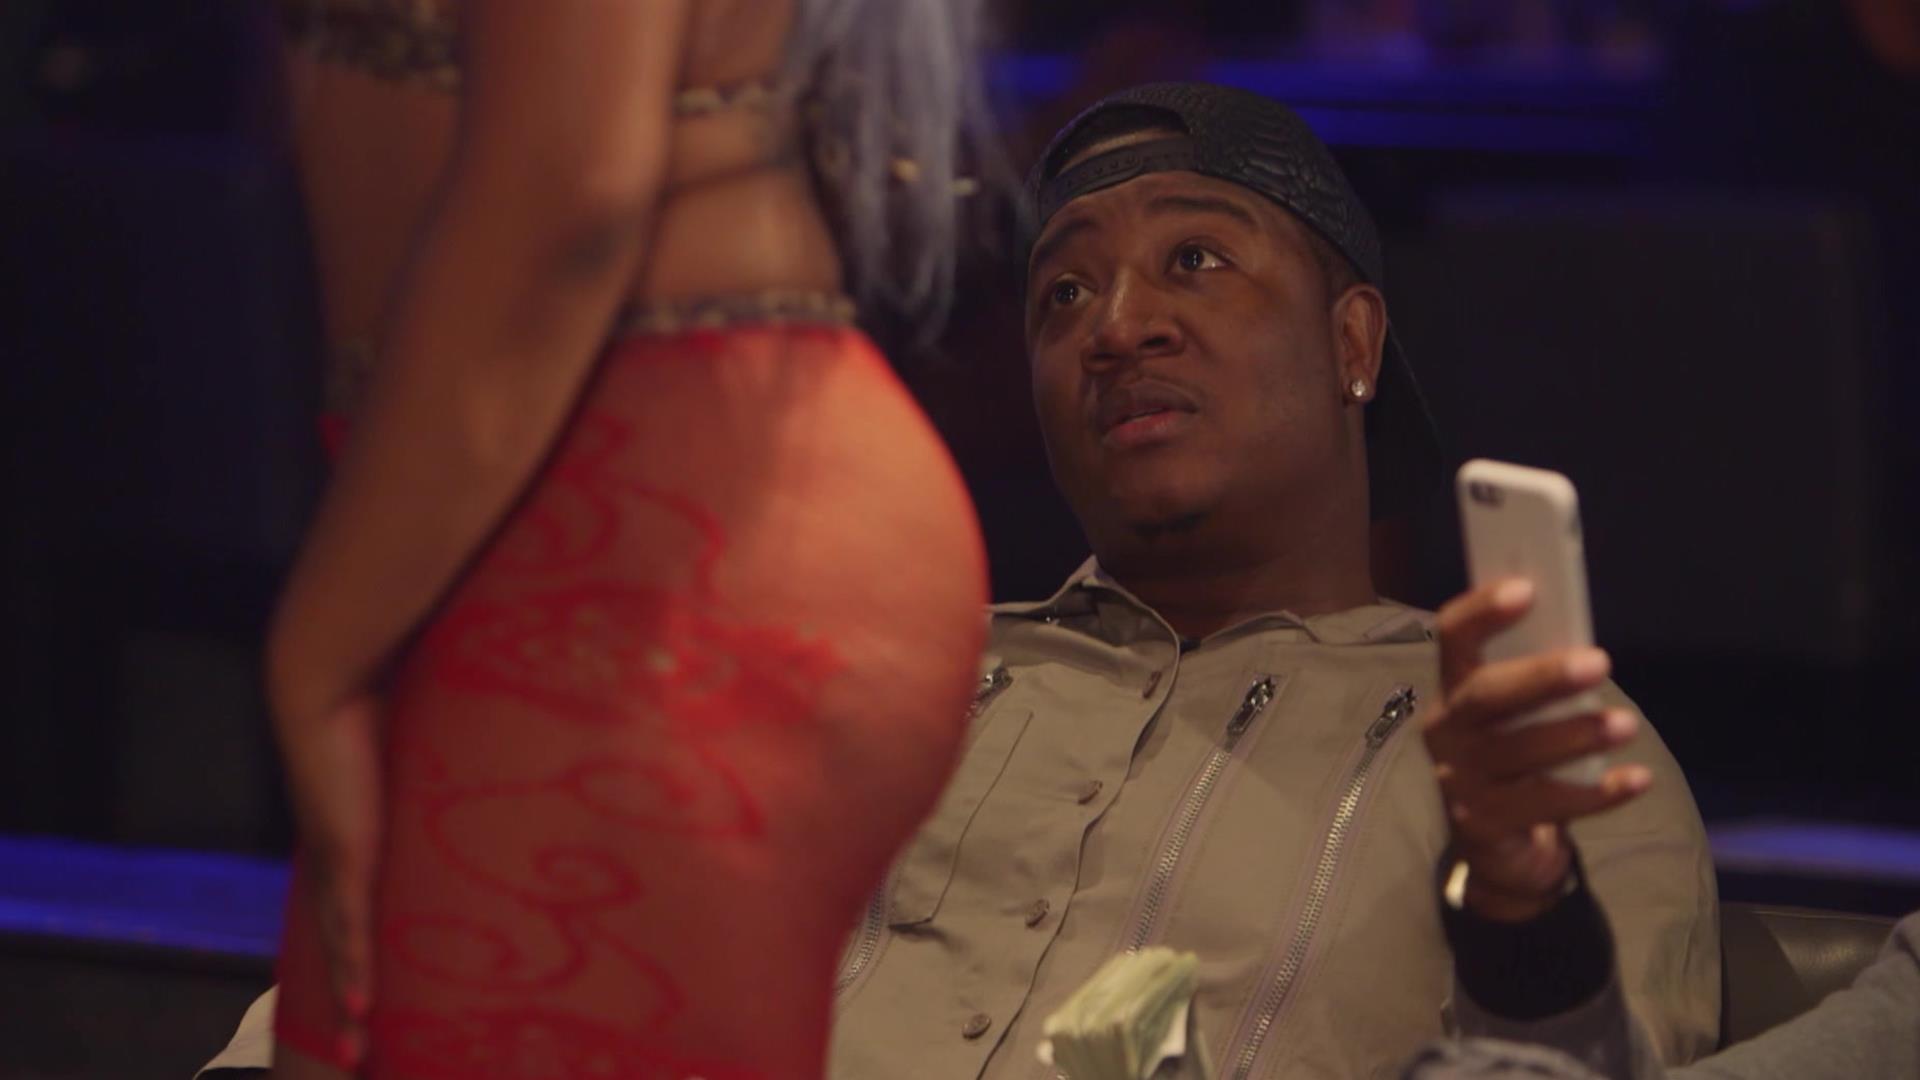 Watch When Yung Joc Shows Up, You Know It's Goin Down! | Beyond the Pole Video Extras